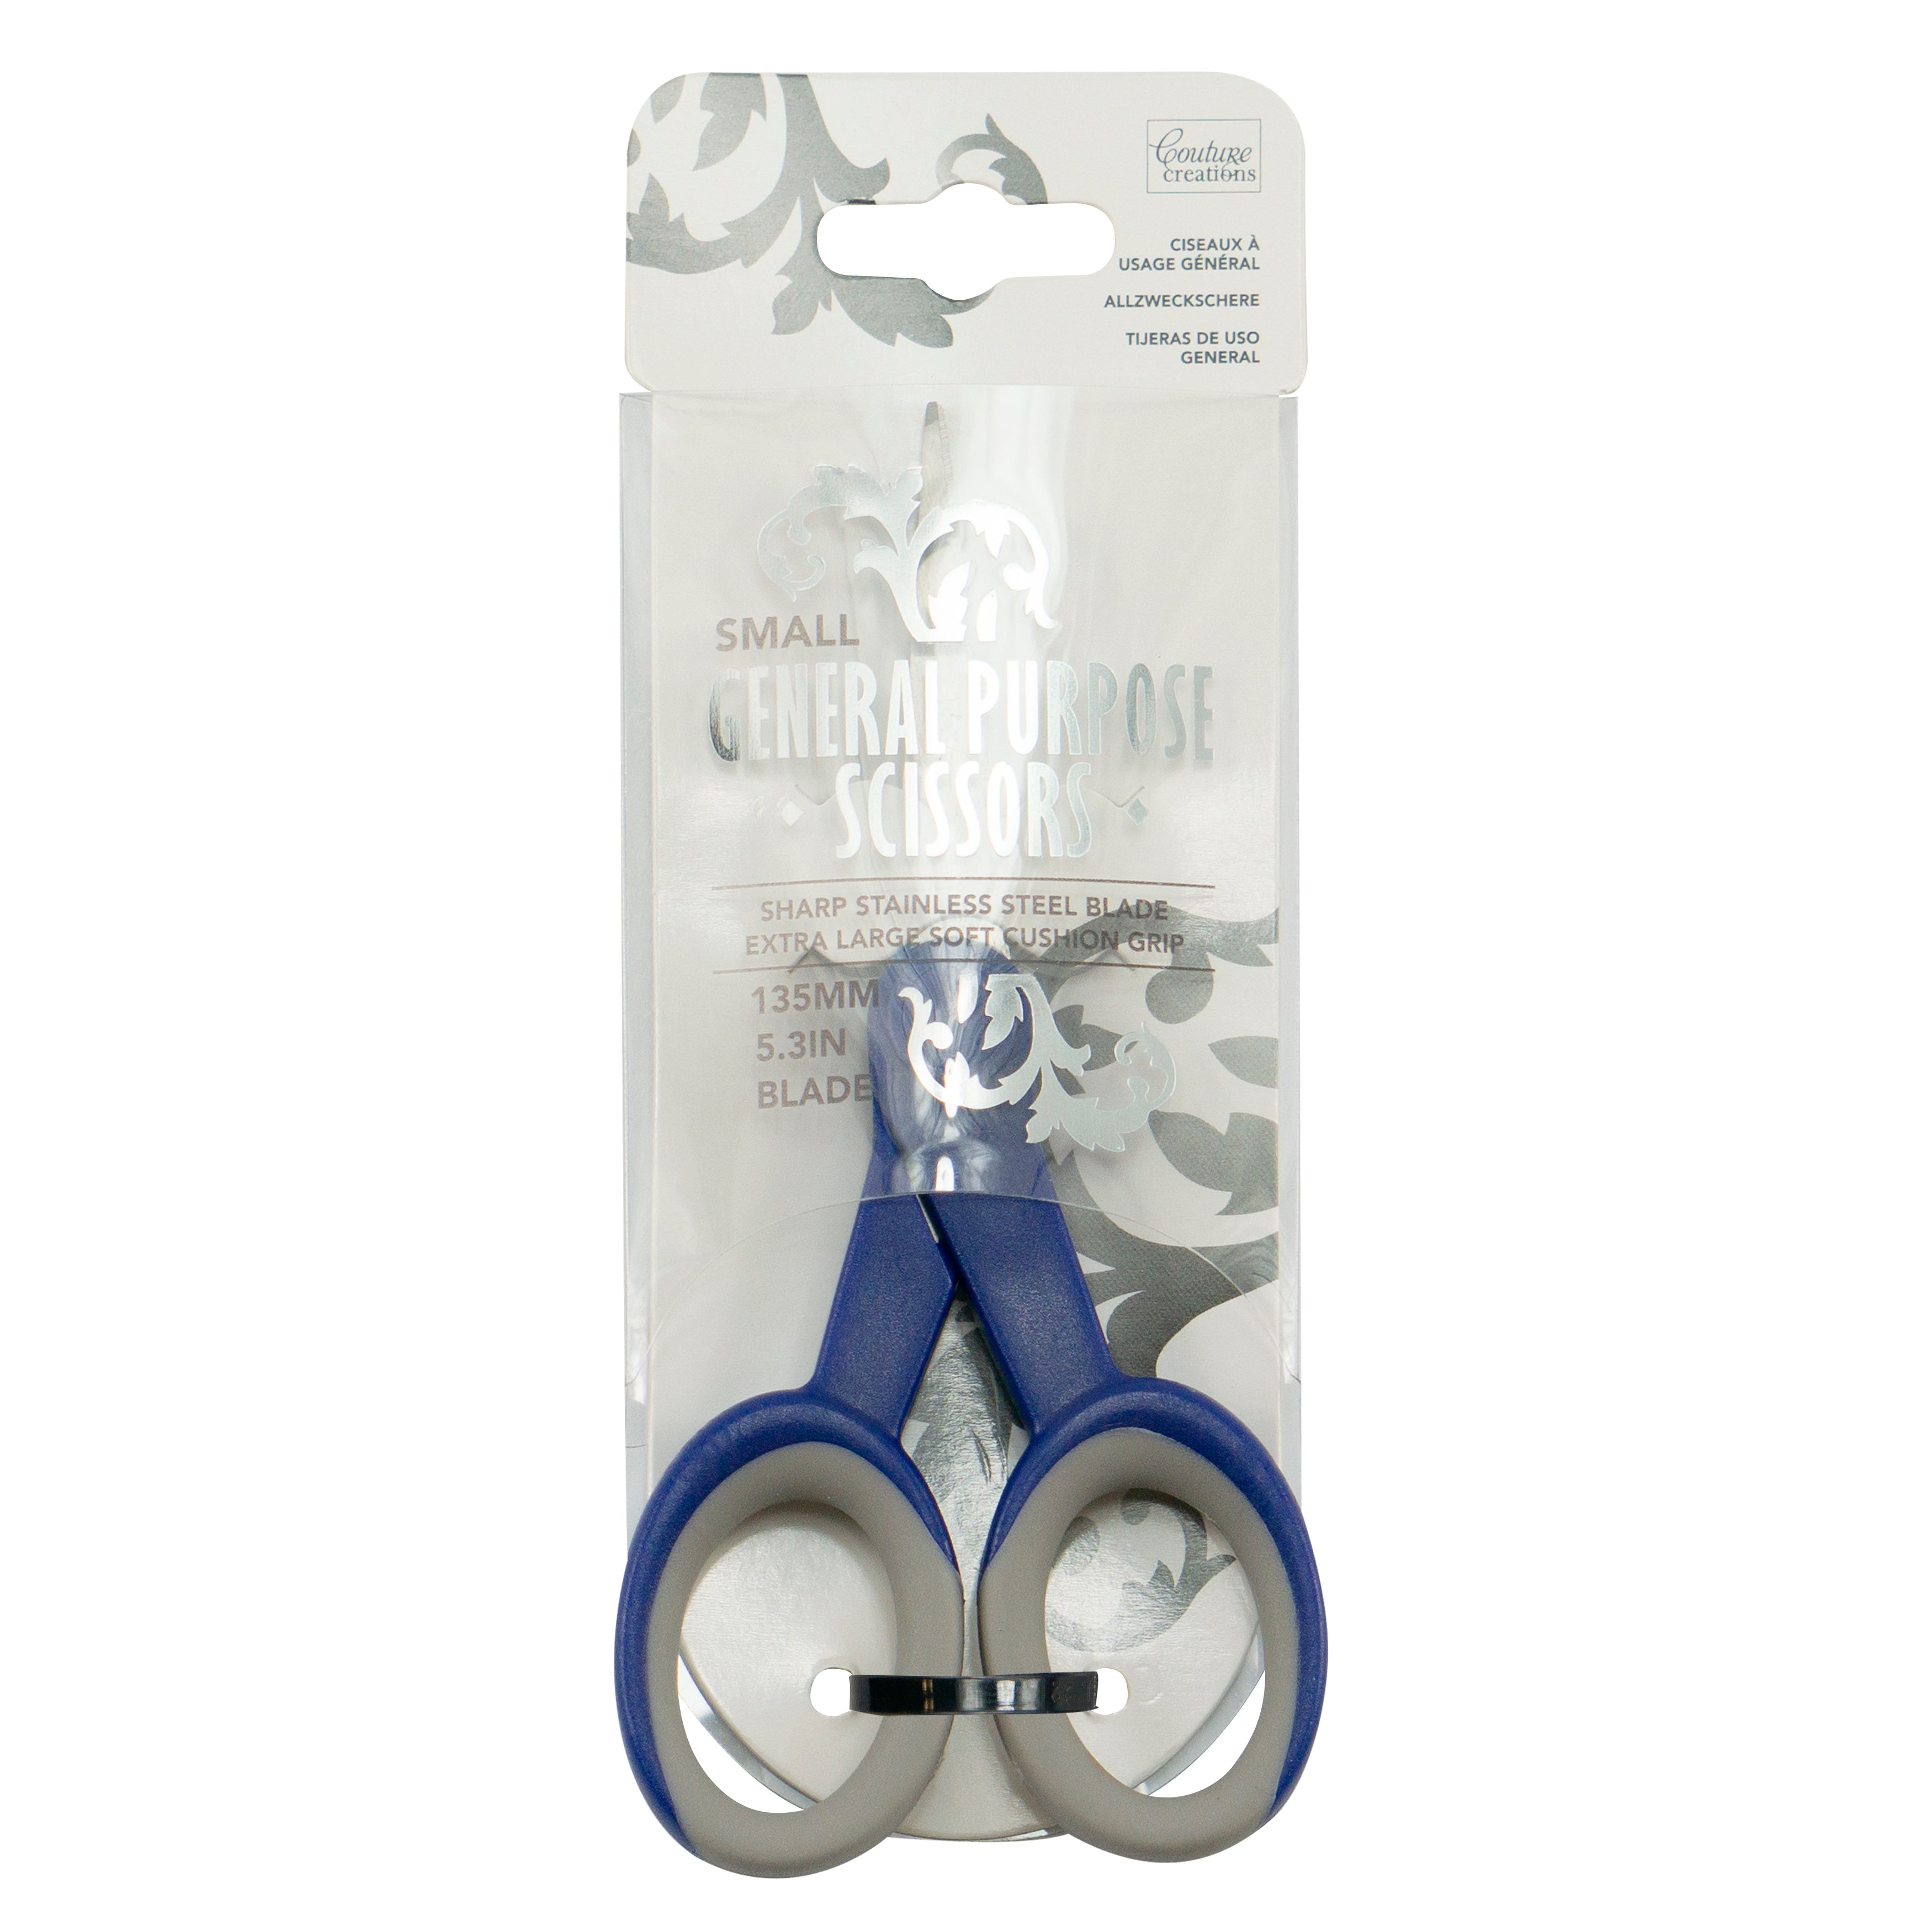 Couture Creations - Small General Purpose Scissors (Stainless Steel Blade)